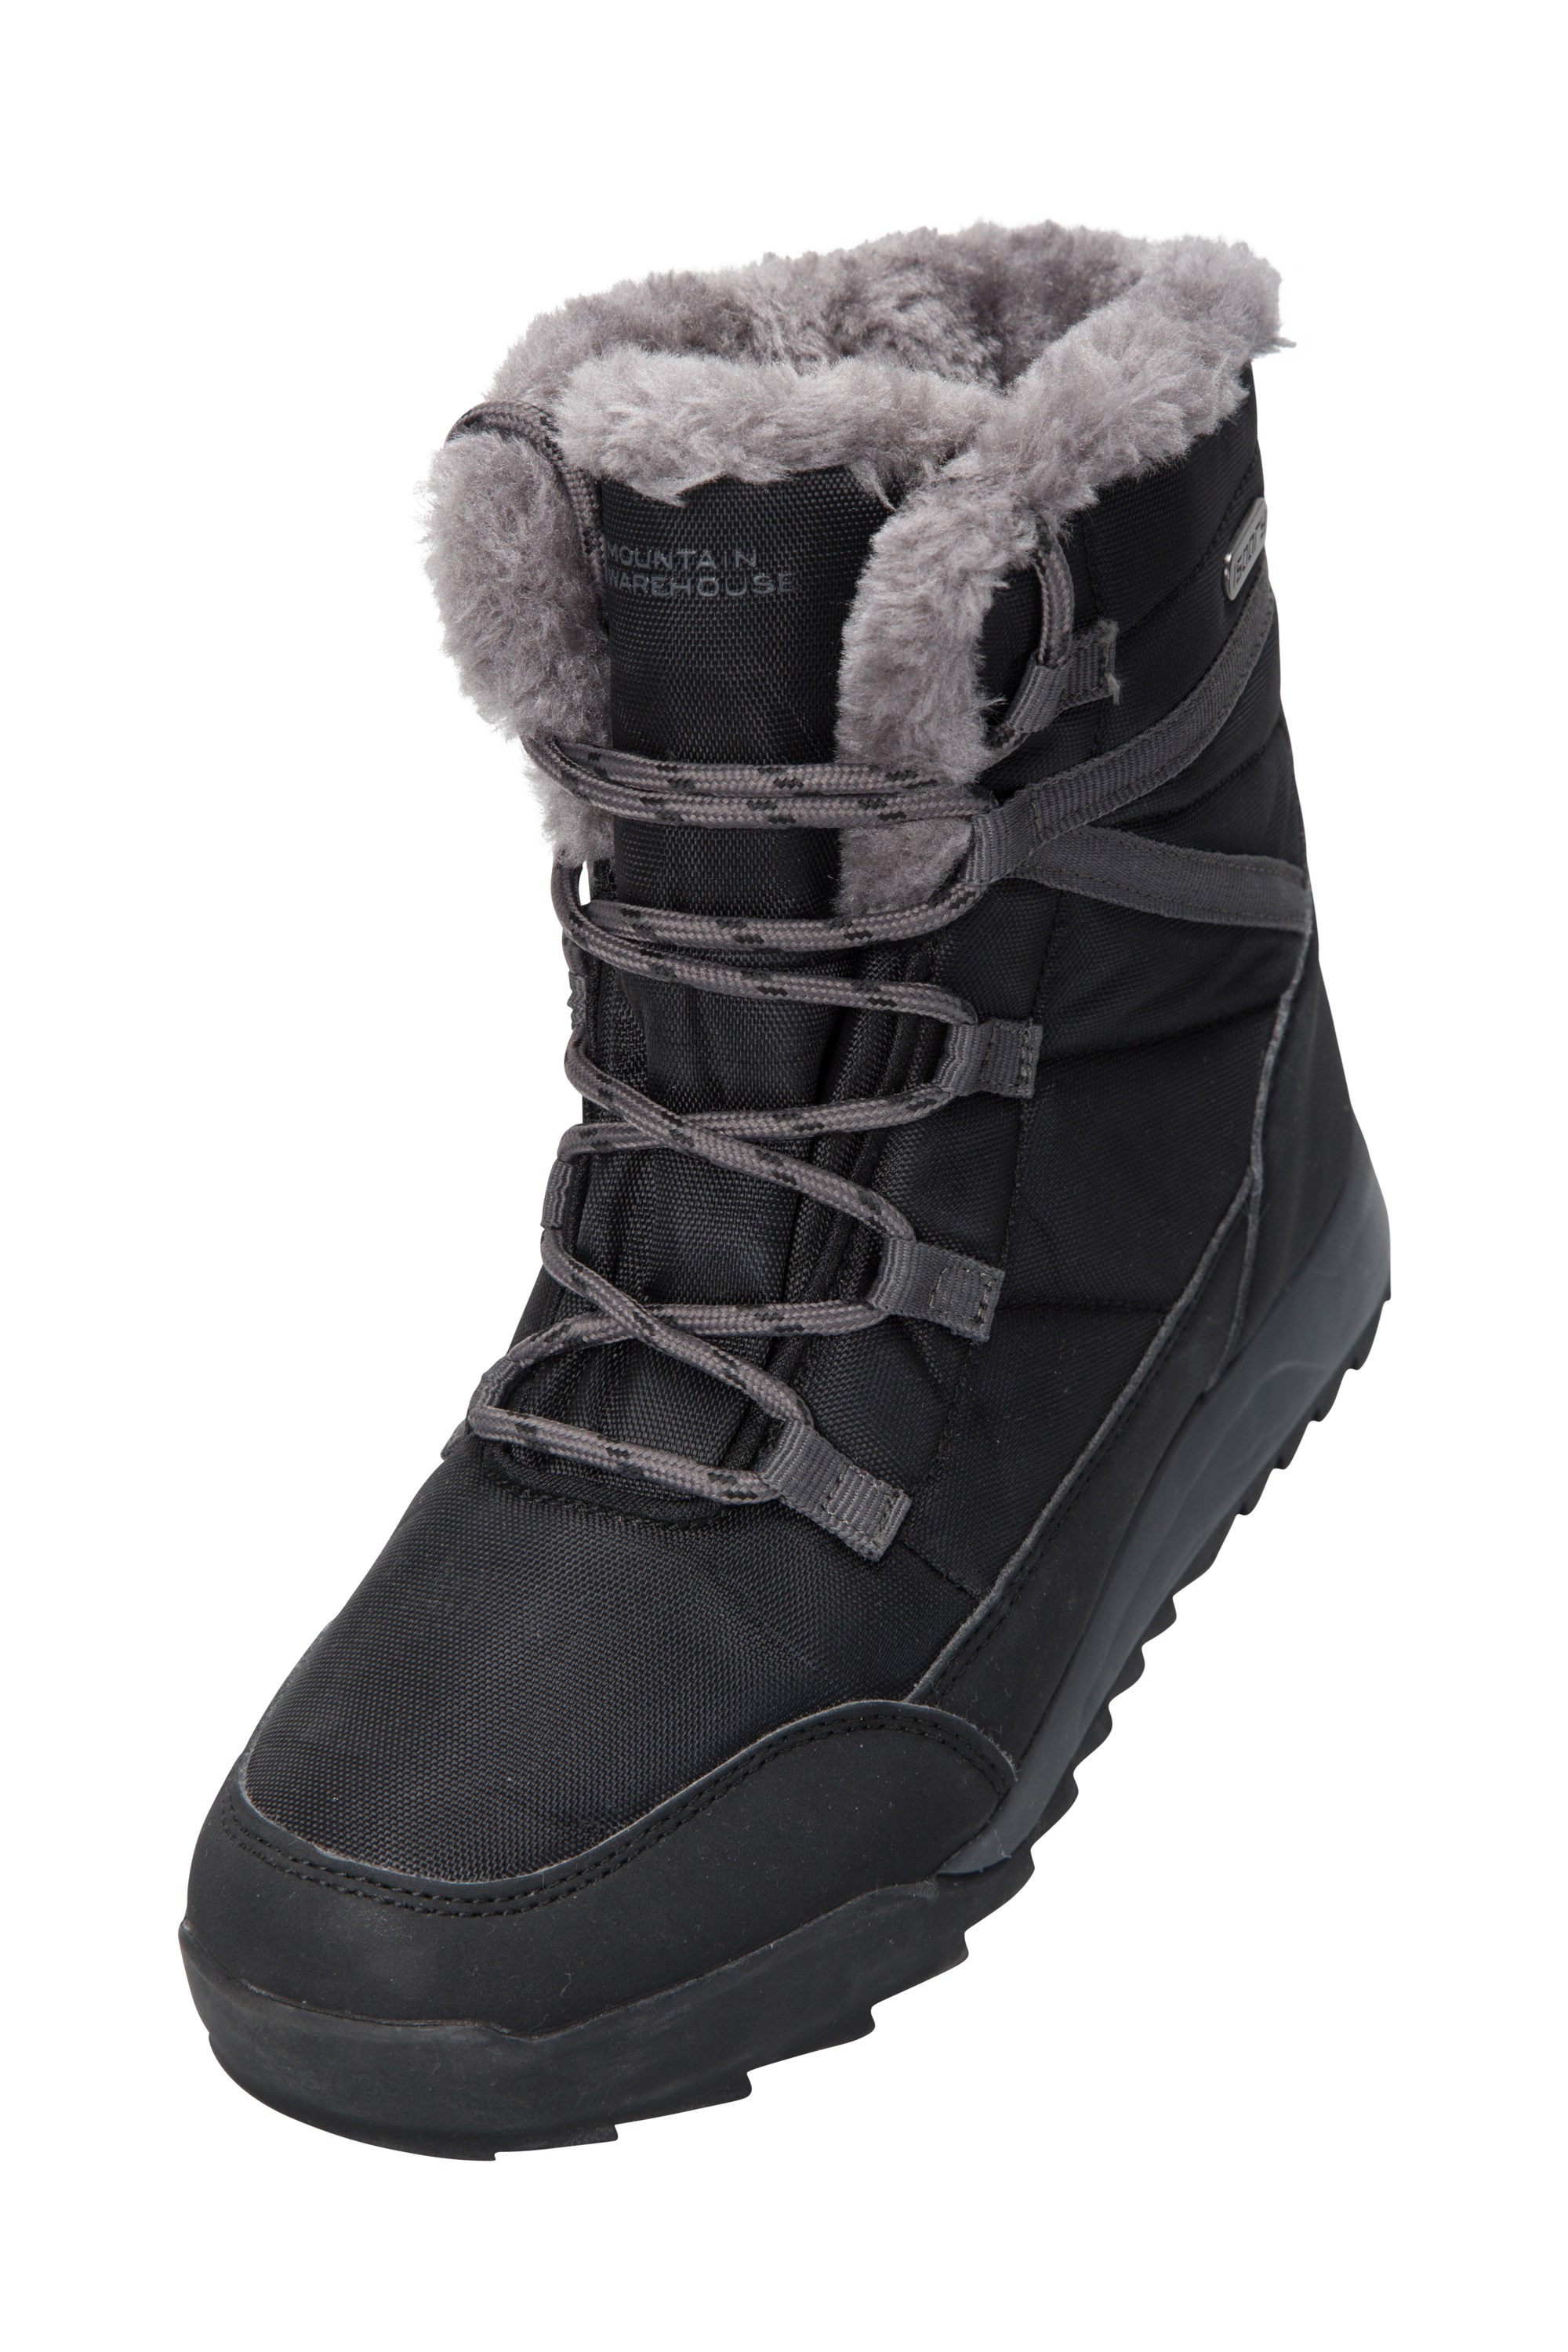 Warm Winter Shoes Mountain Warehouse Leisure Womens Snow Boots 